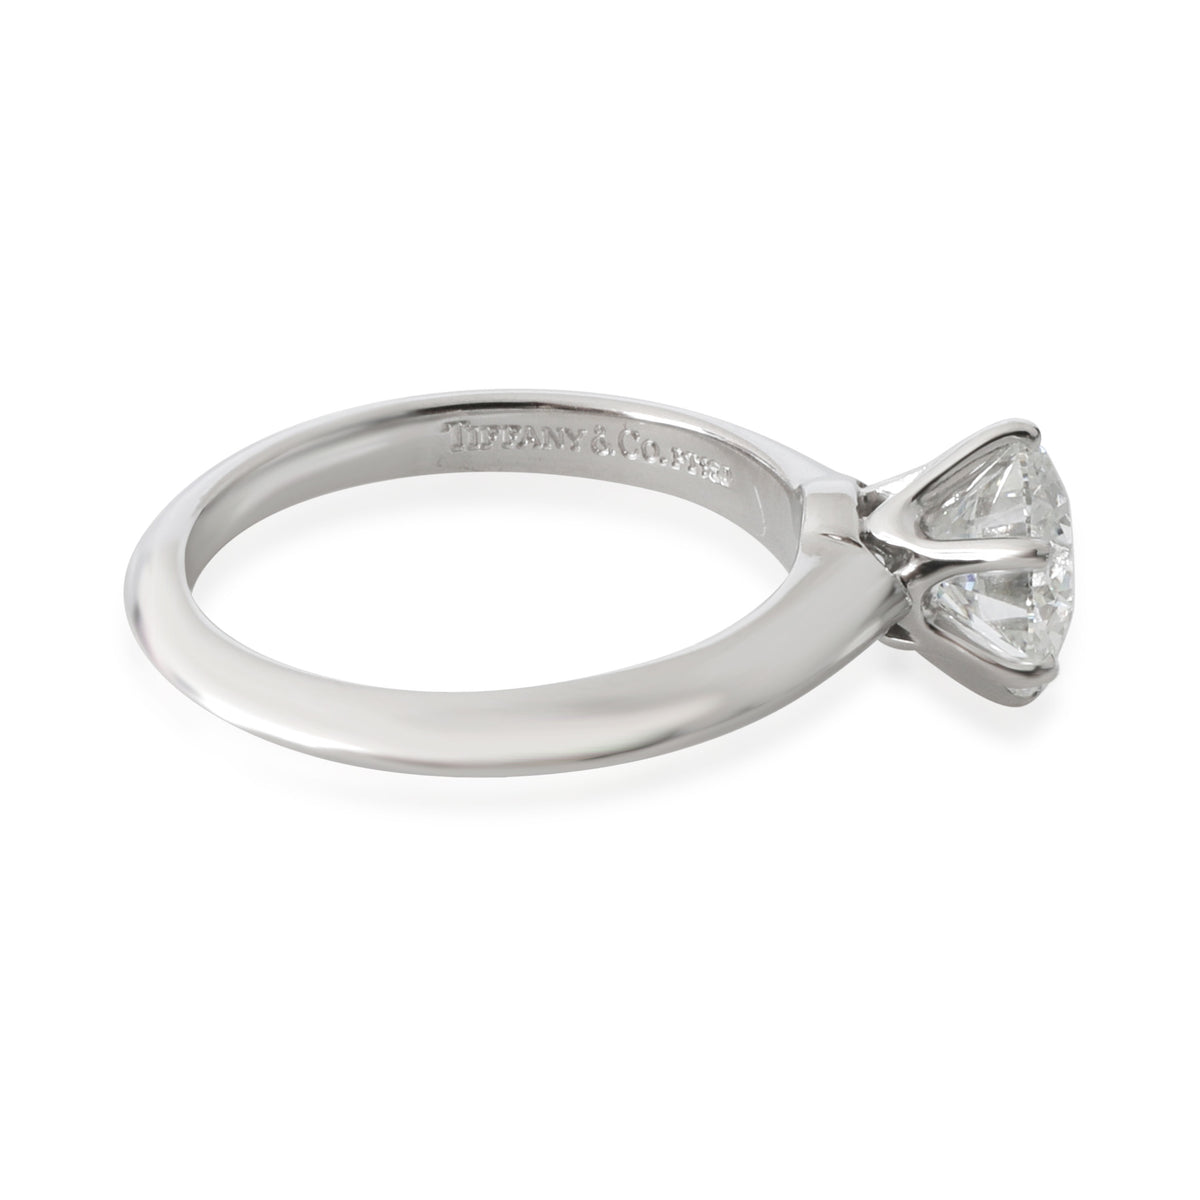 Tiffany & Co. Diamond Solitaire Engagement Ring in Platinum E IF 1.18 CTW